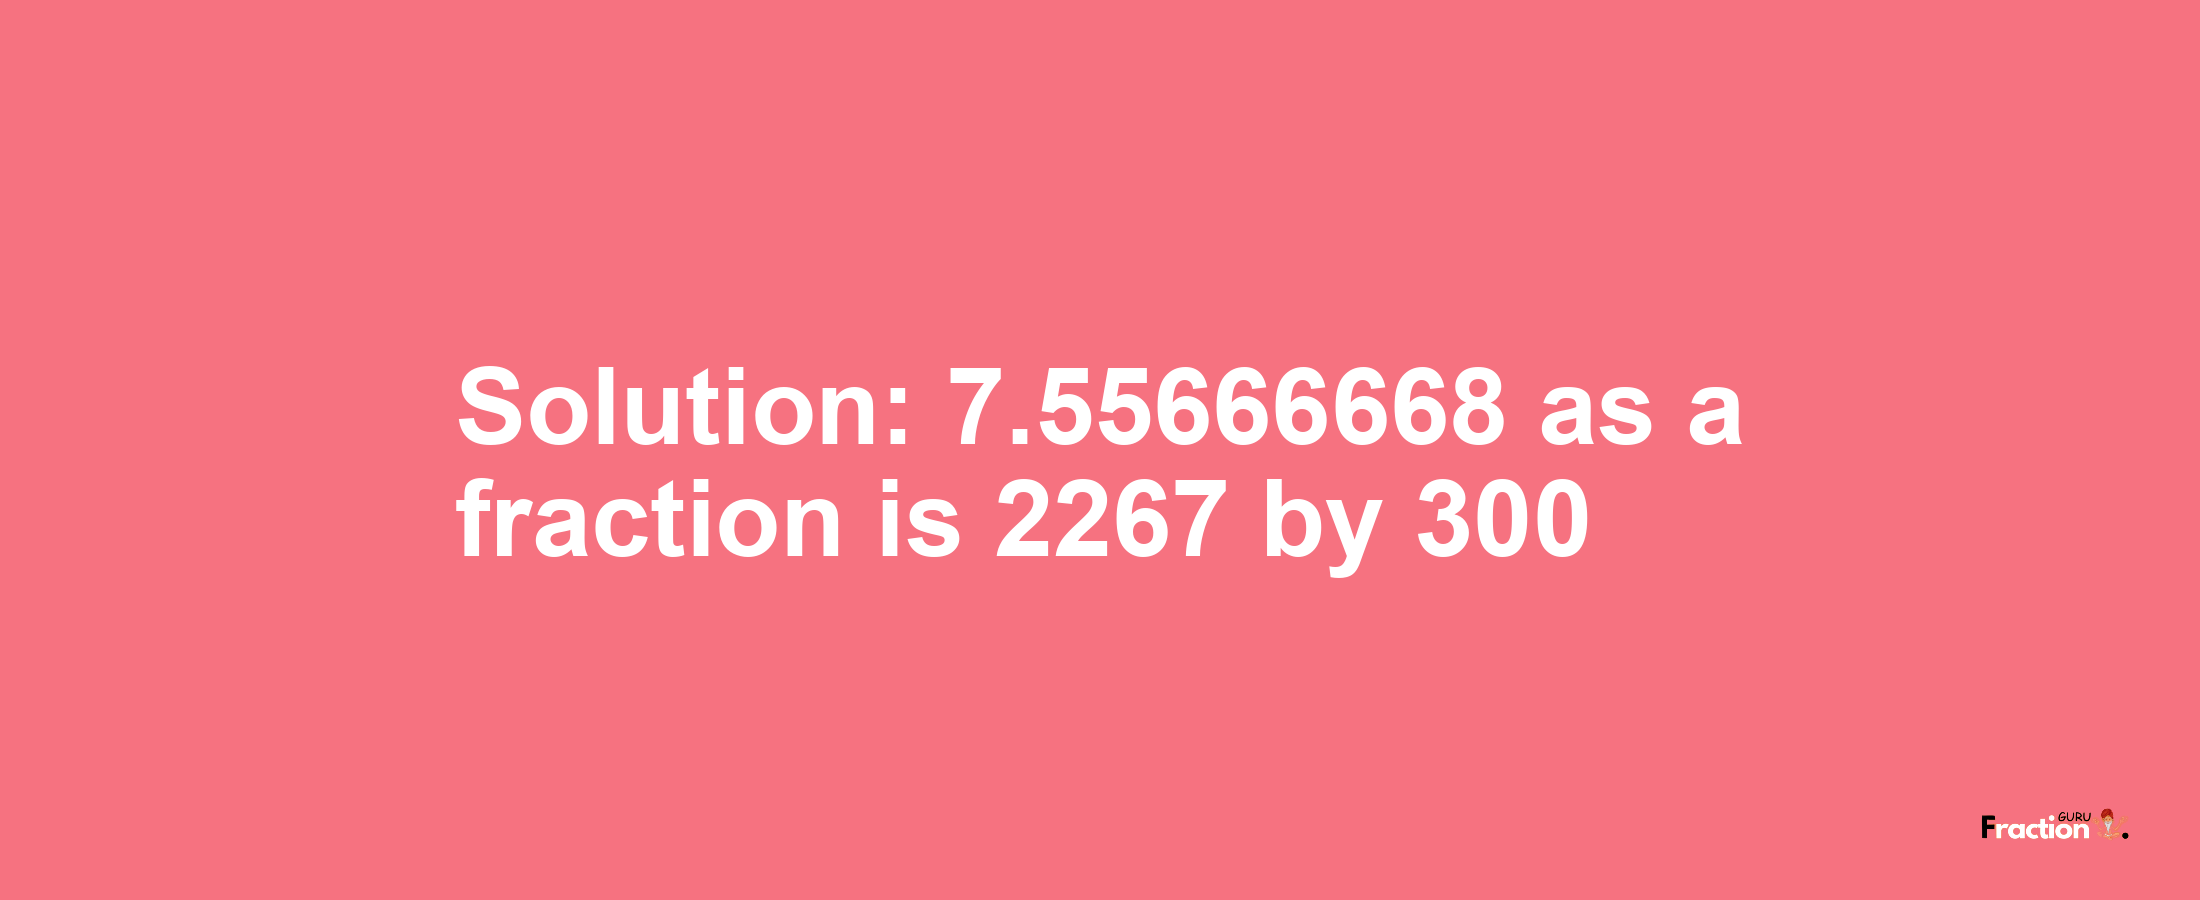 Solution:7.55666668 as a fraction is 2267/300